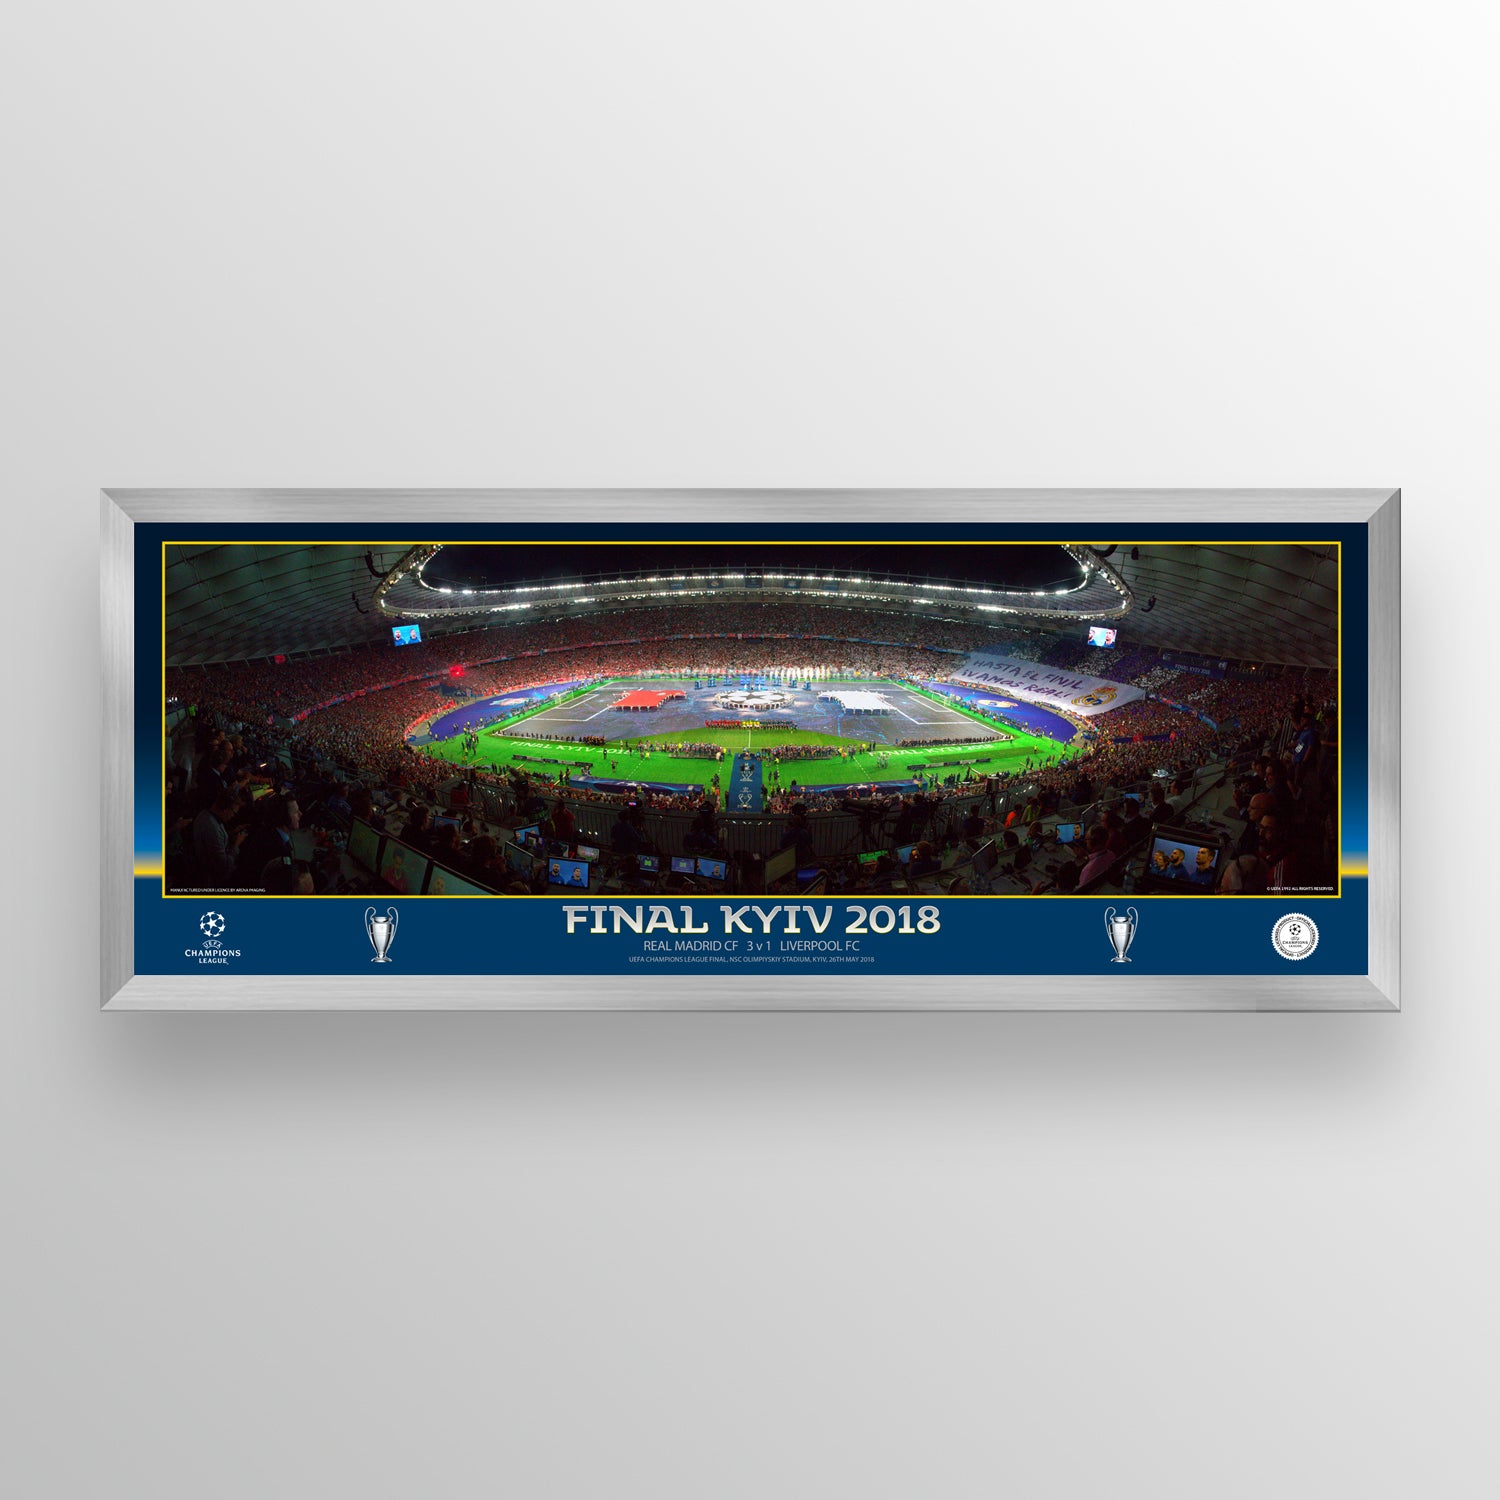 UEFA Champions League 2018 Final - Winner: Real Madrid - Landscape Frame UEFA Club Competitions Online Store